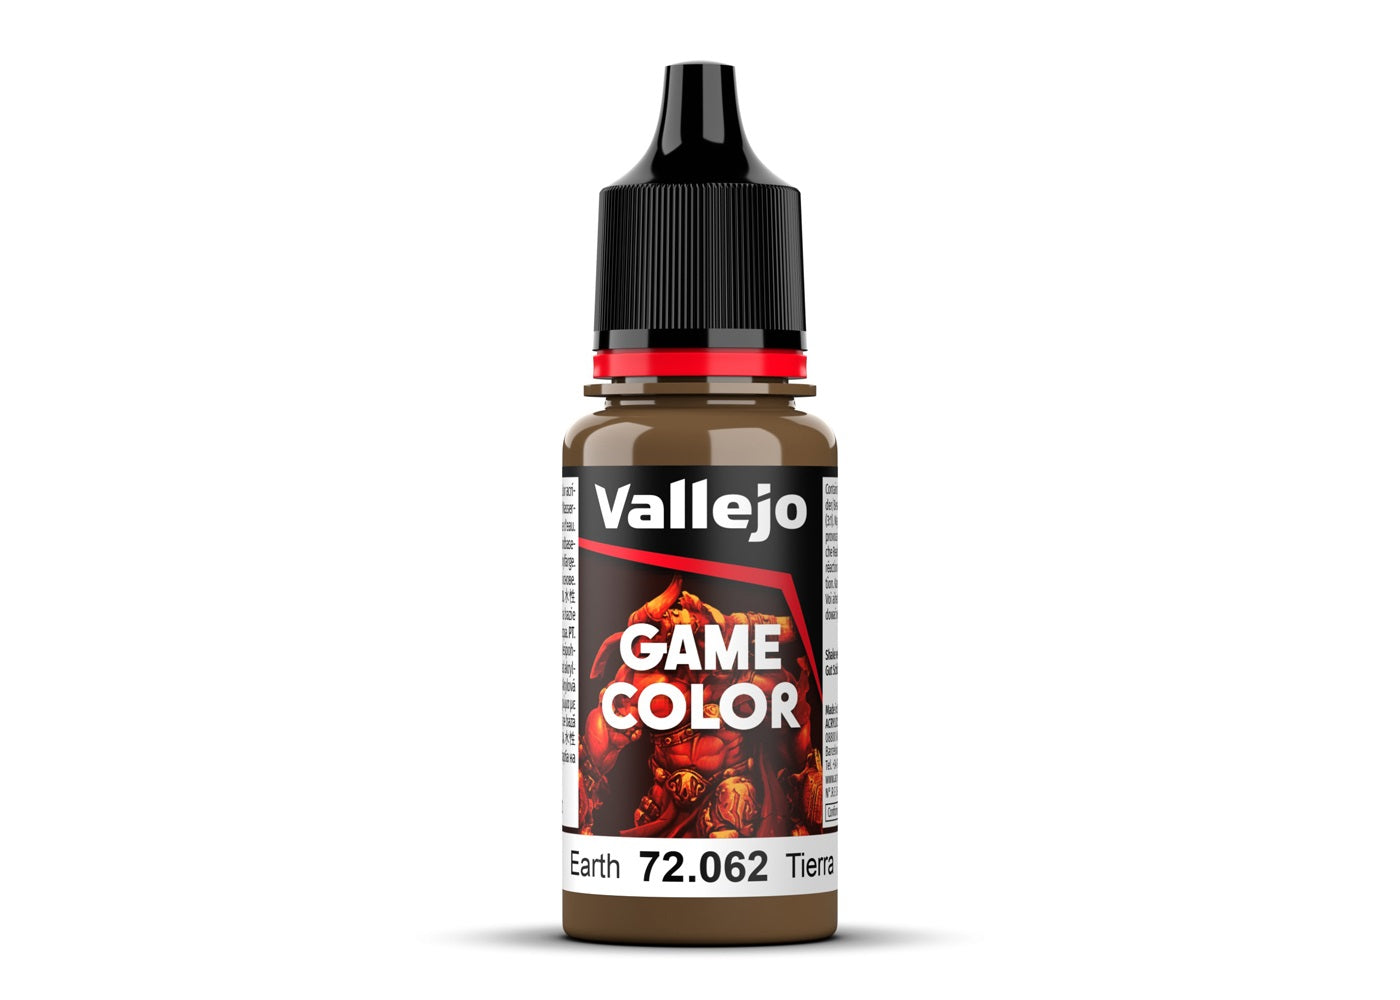 Vallejo Game Color Earth - 18ml